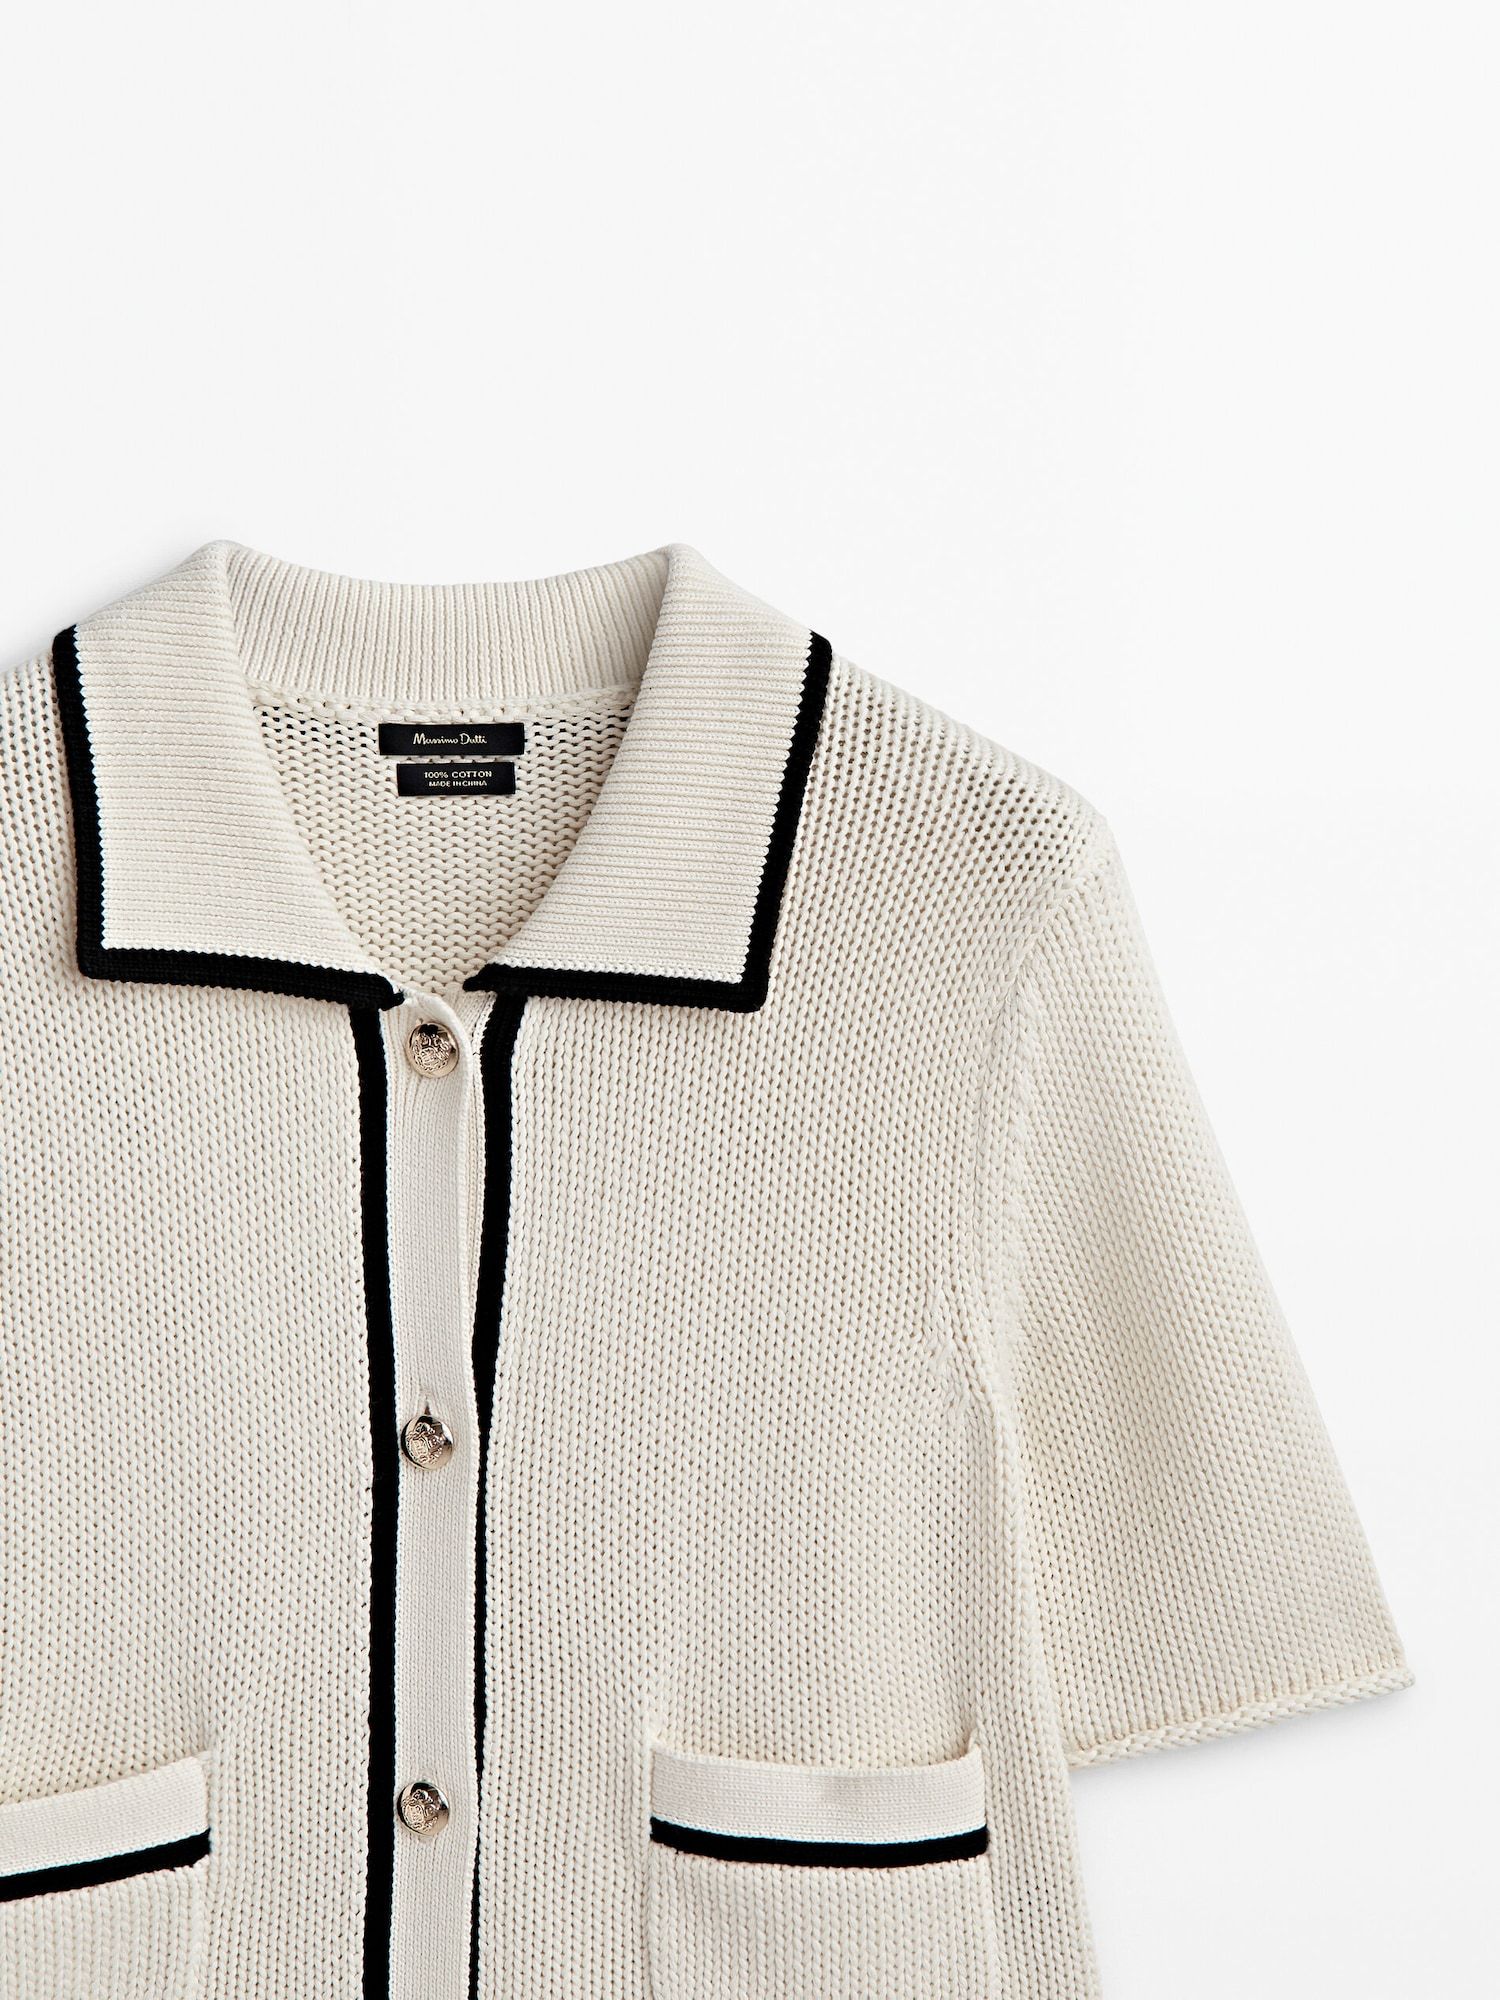 Contrast knit textured cardigan with pockets | Massimo Dutti (US)